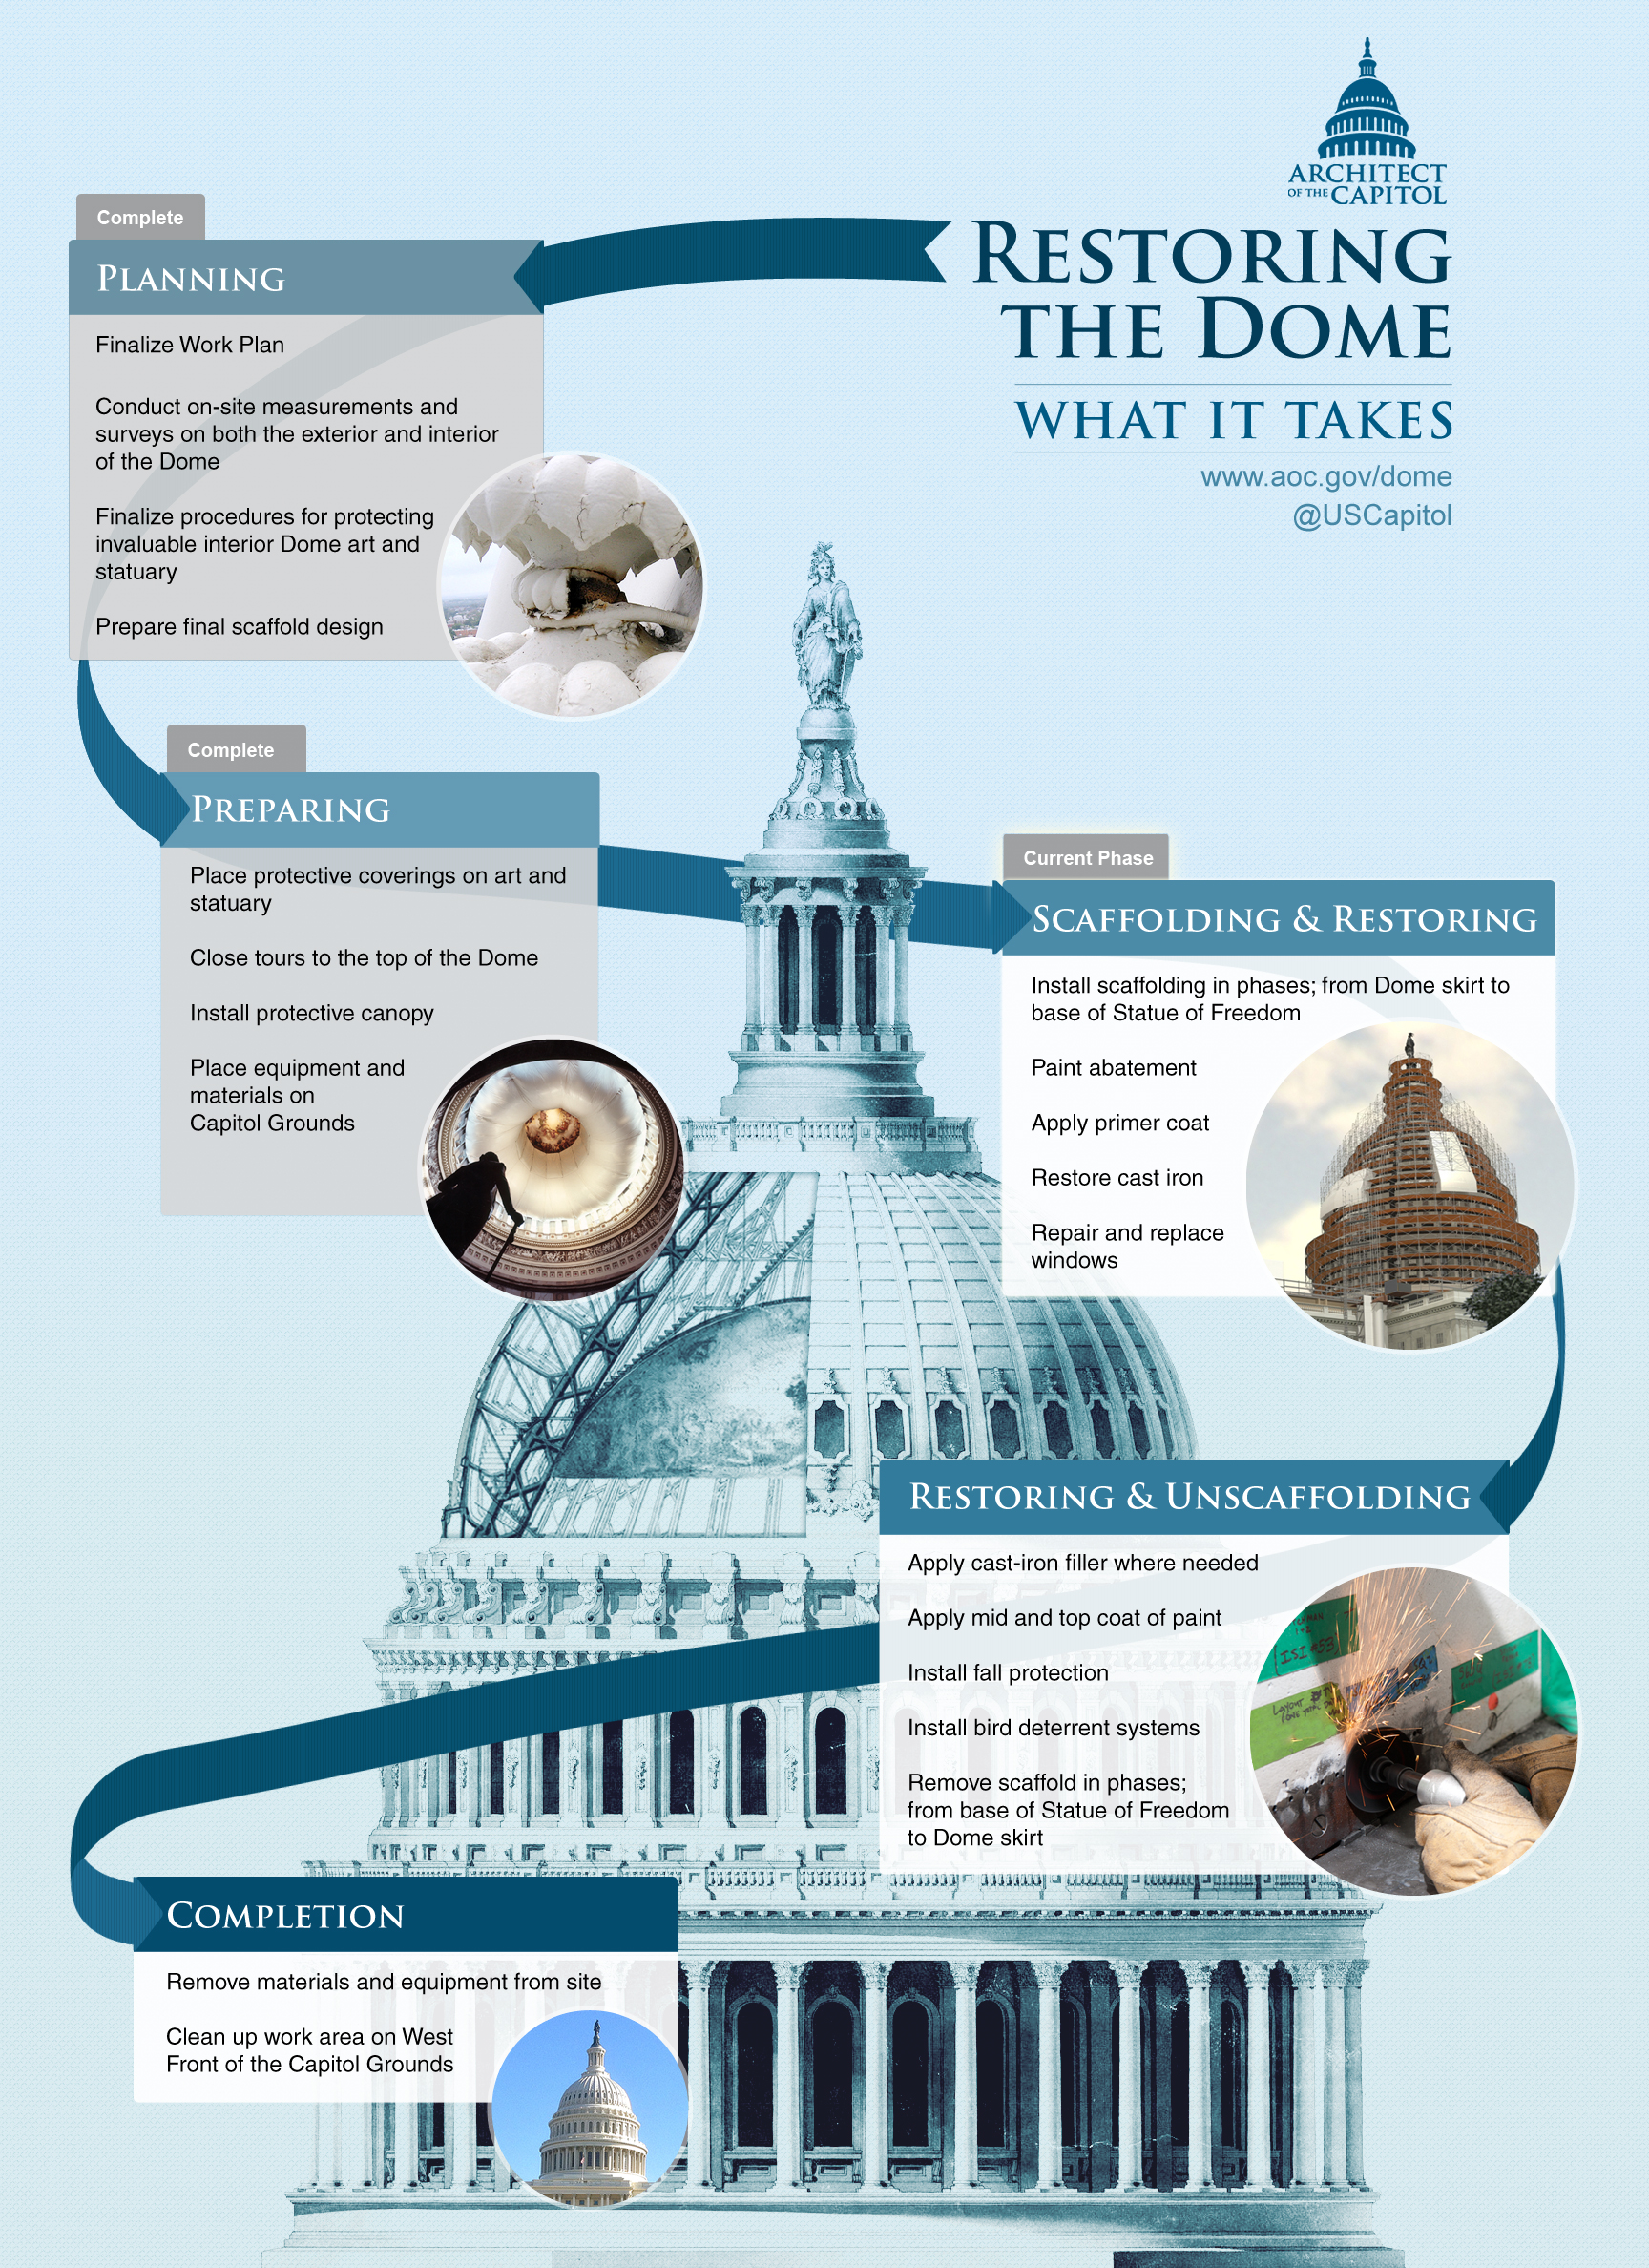 Infographic that shows what it takes to restore the Capitol Dome